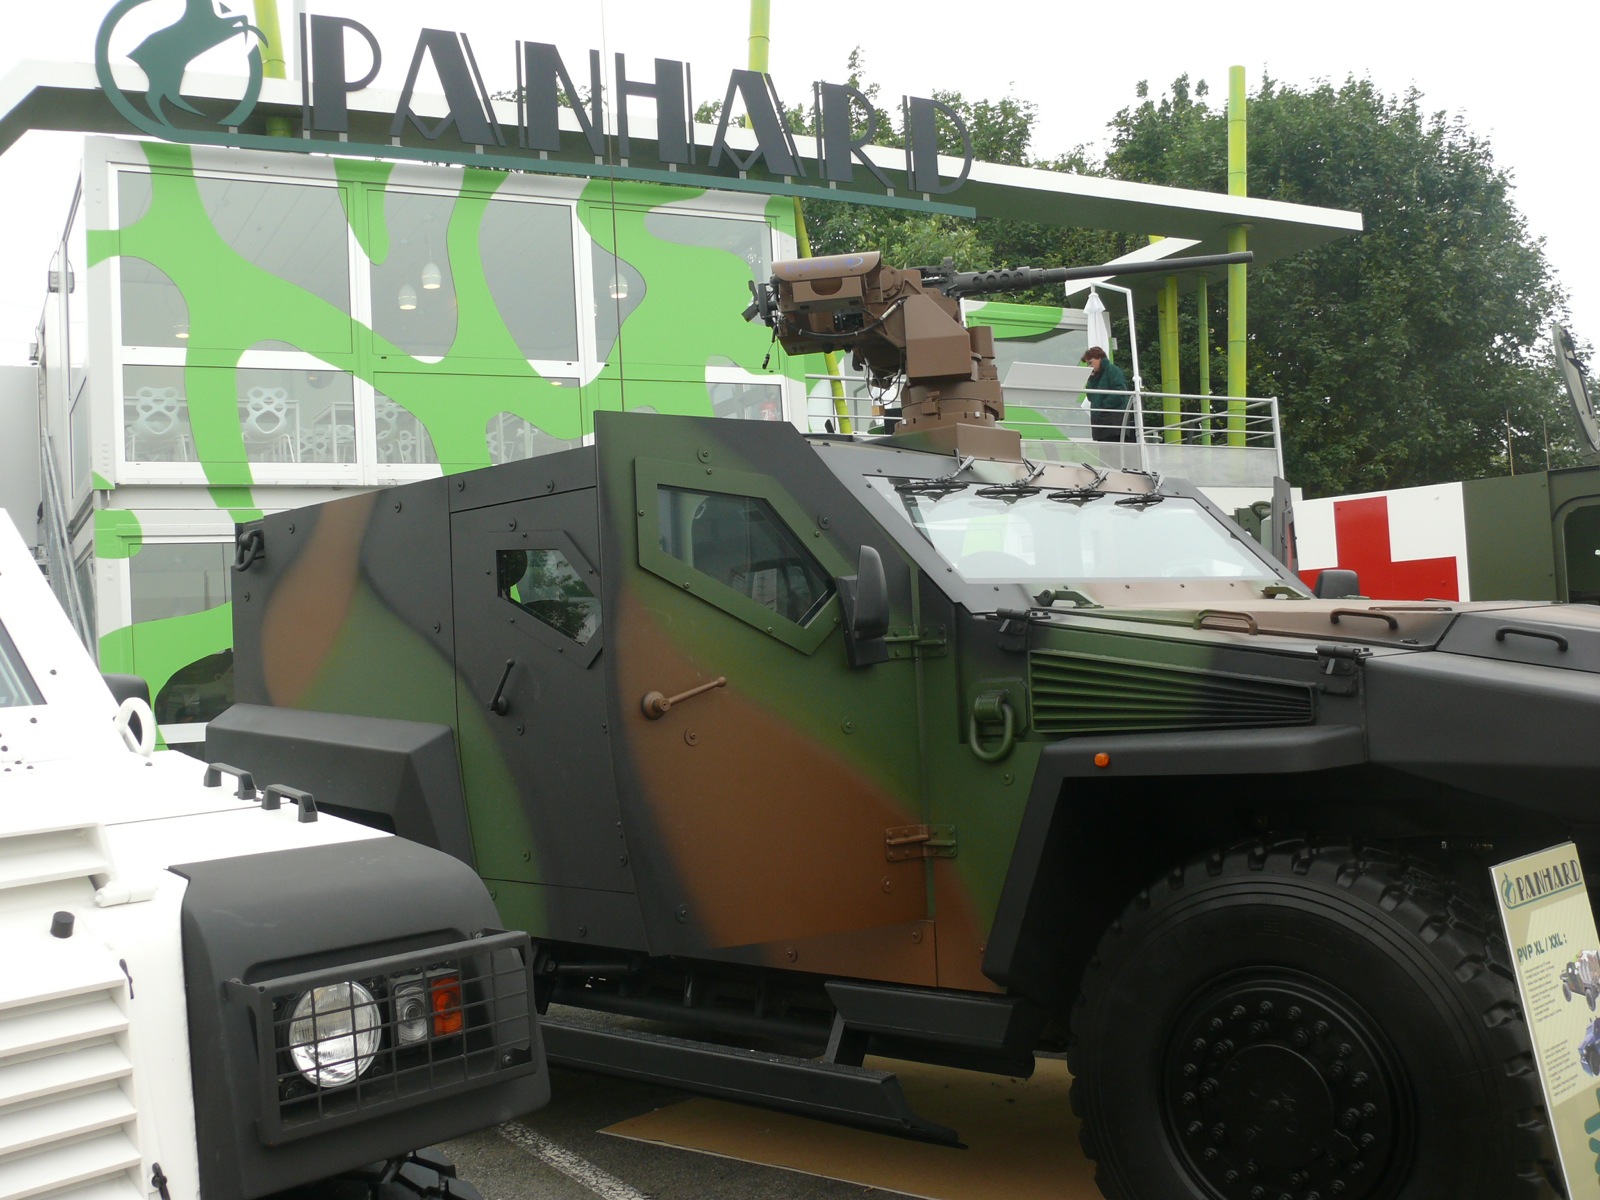 a large army vehicle parked by a green wall